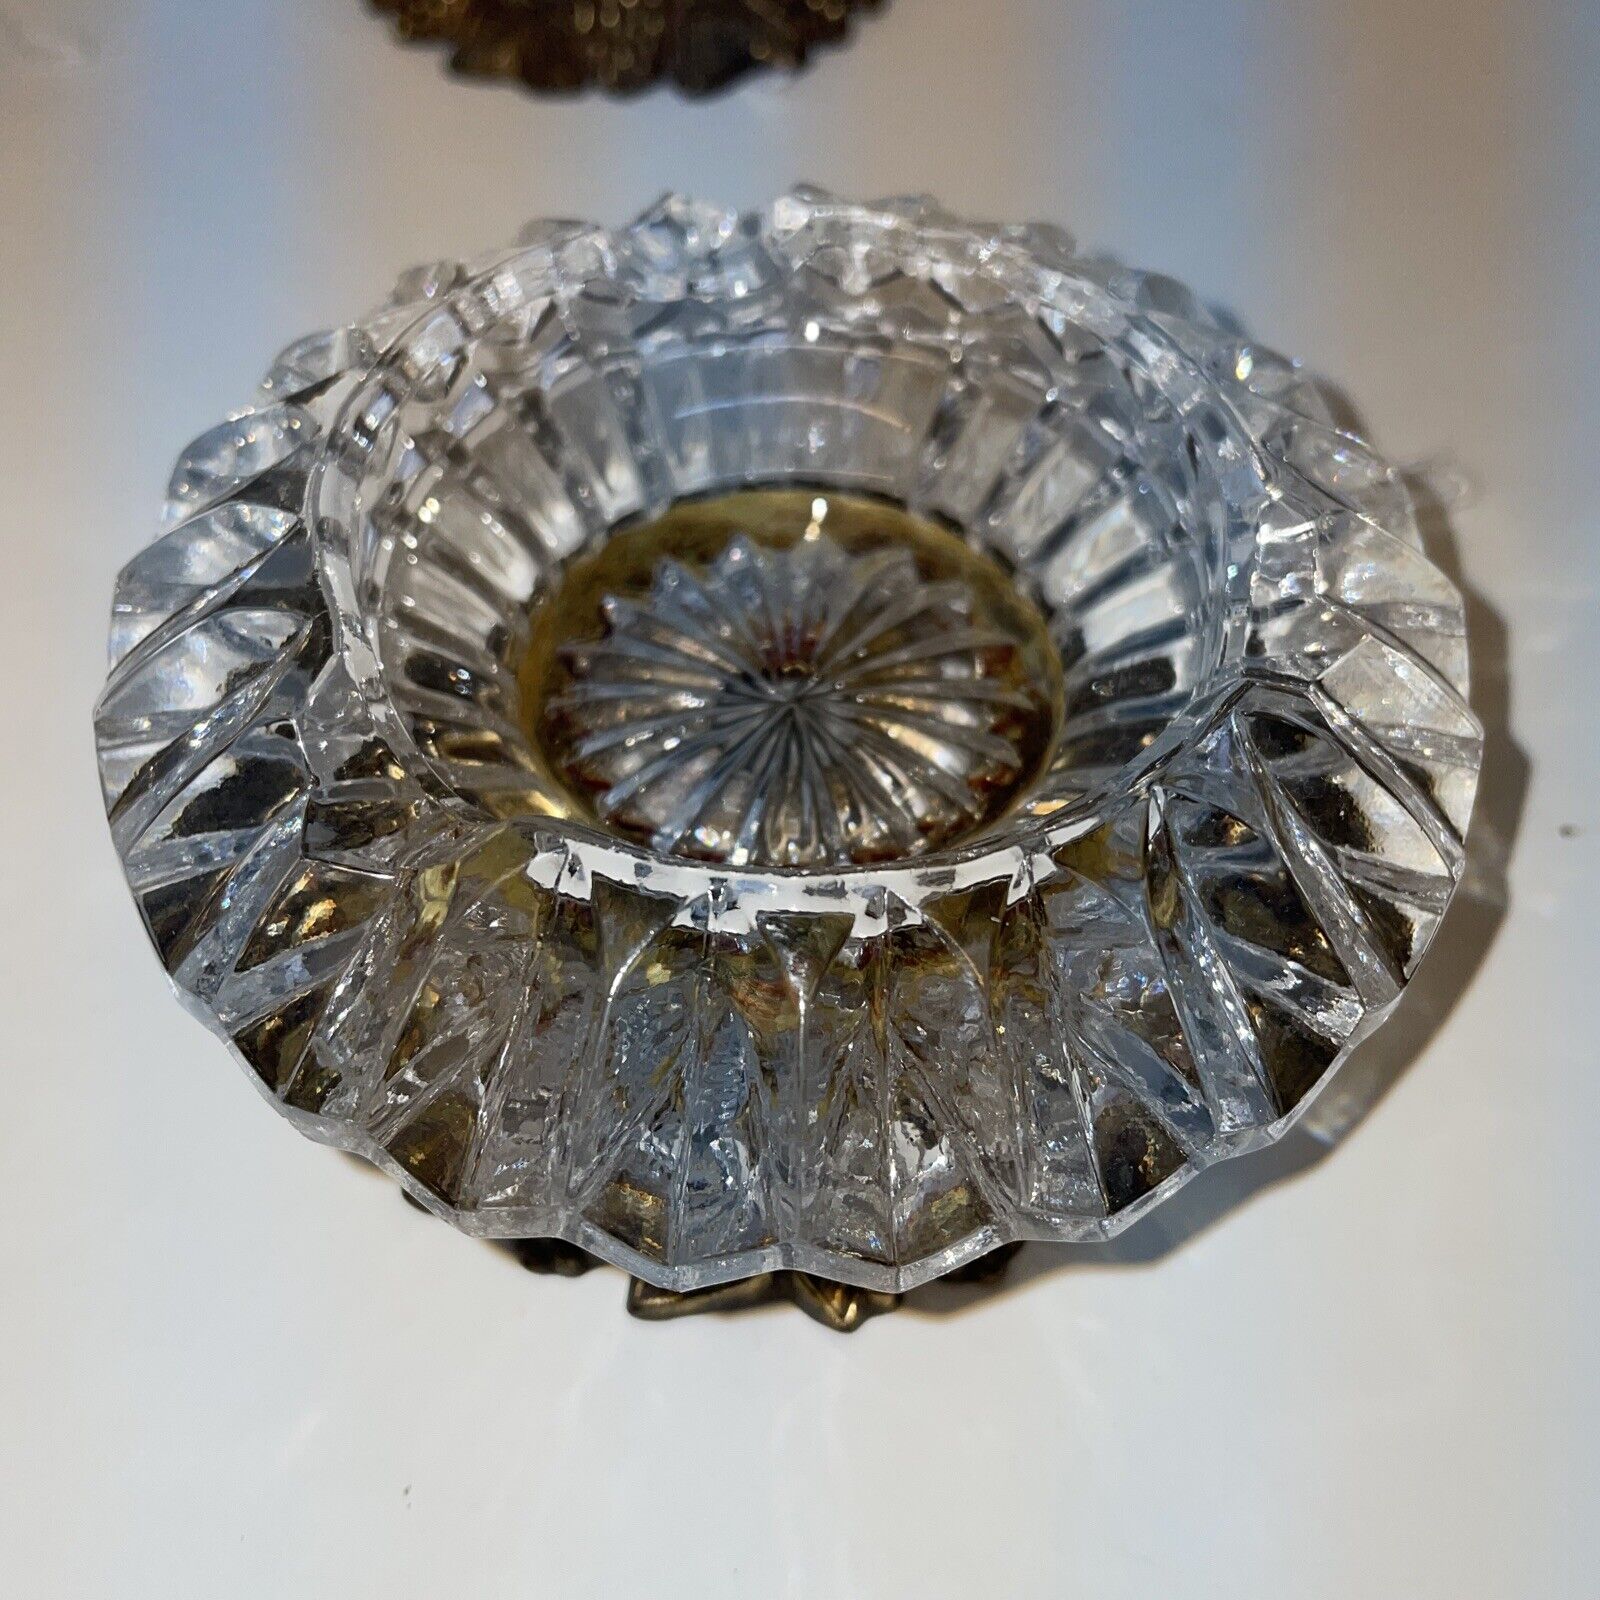 Vintage Art Deco Crystal and Brass Ashtray # 311